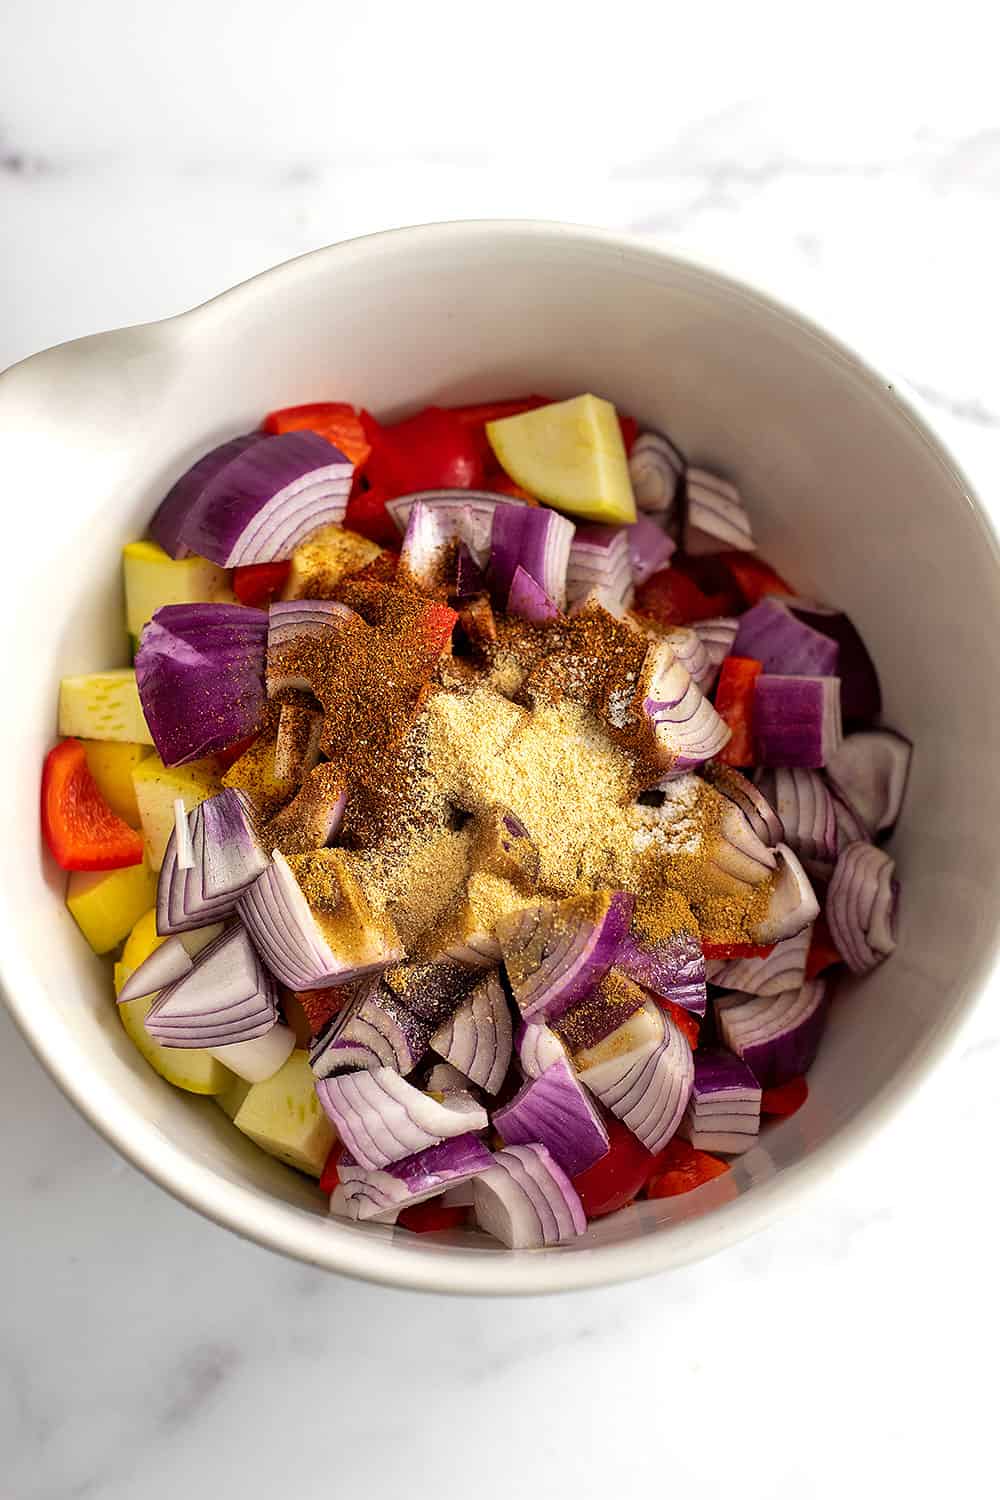 Spices on top of a bowl of chopped vegetables.